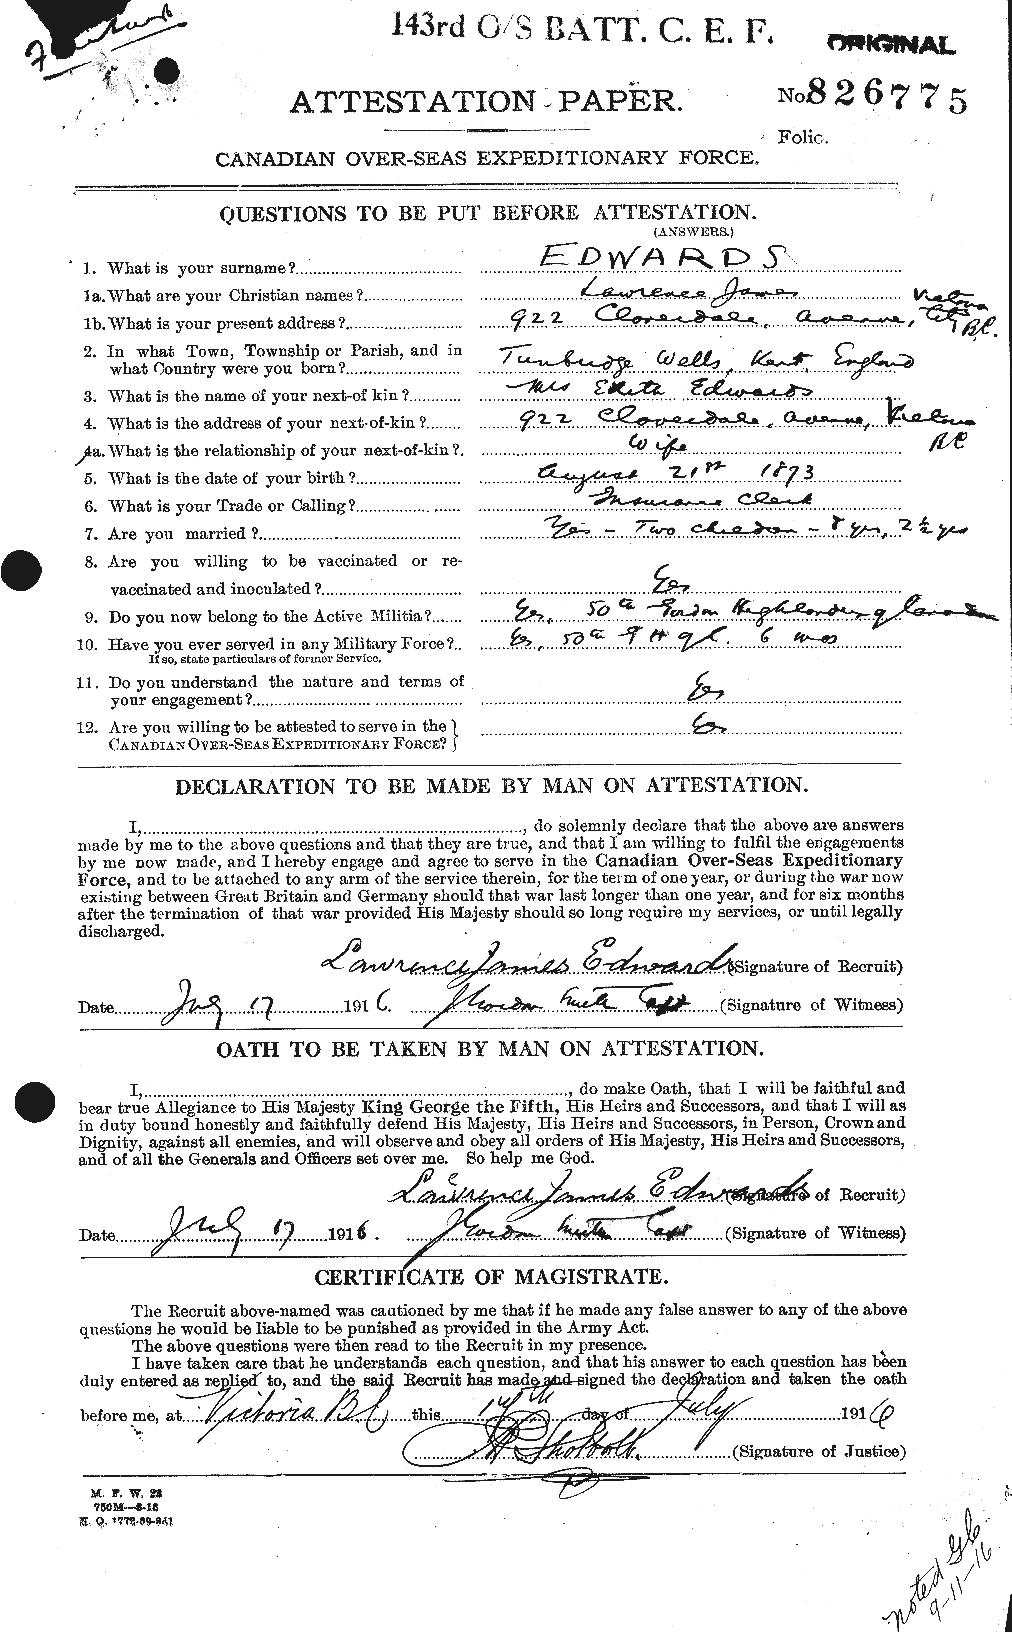 Personnel Records of the First World War - CEF 310194a